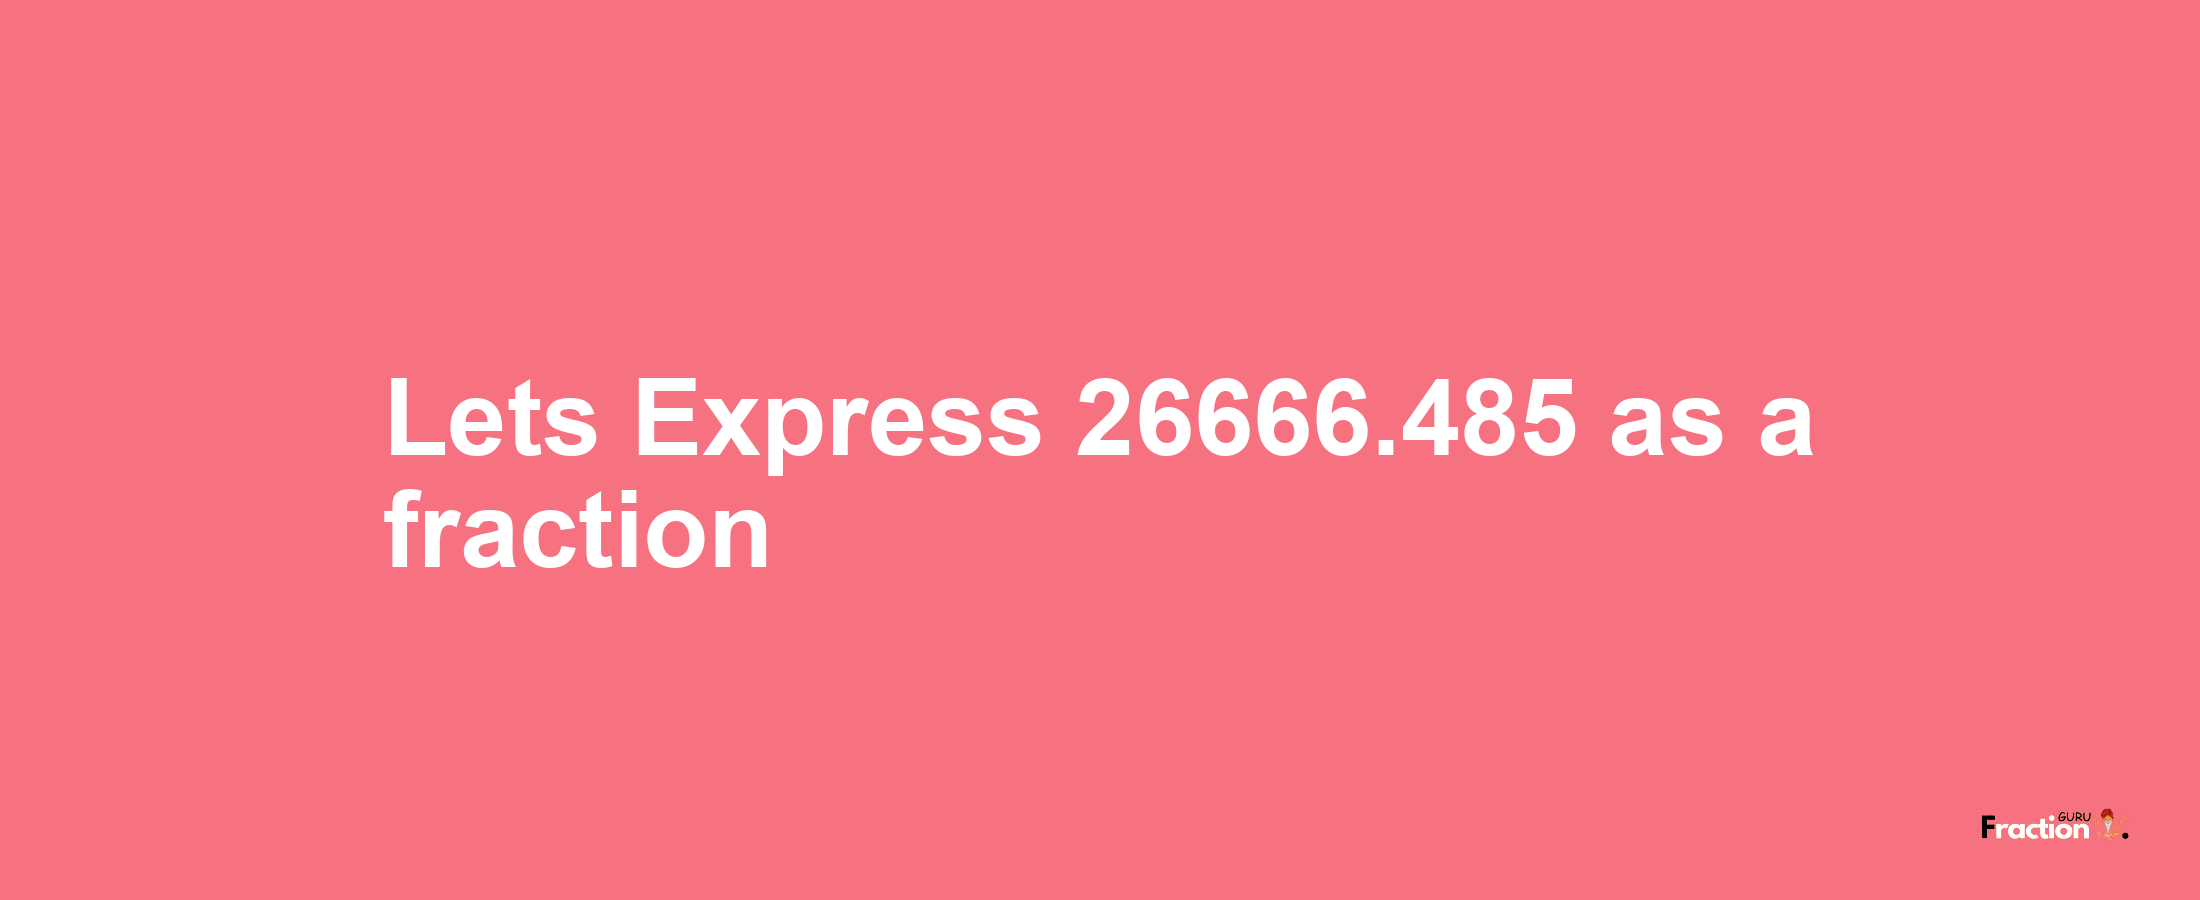 Lets Express 26666.485 as afraction